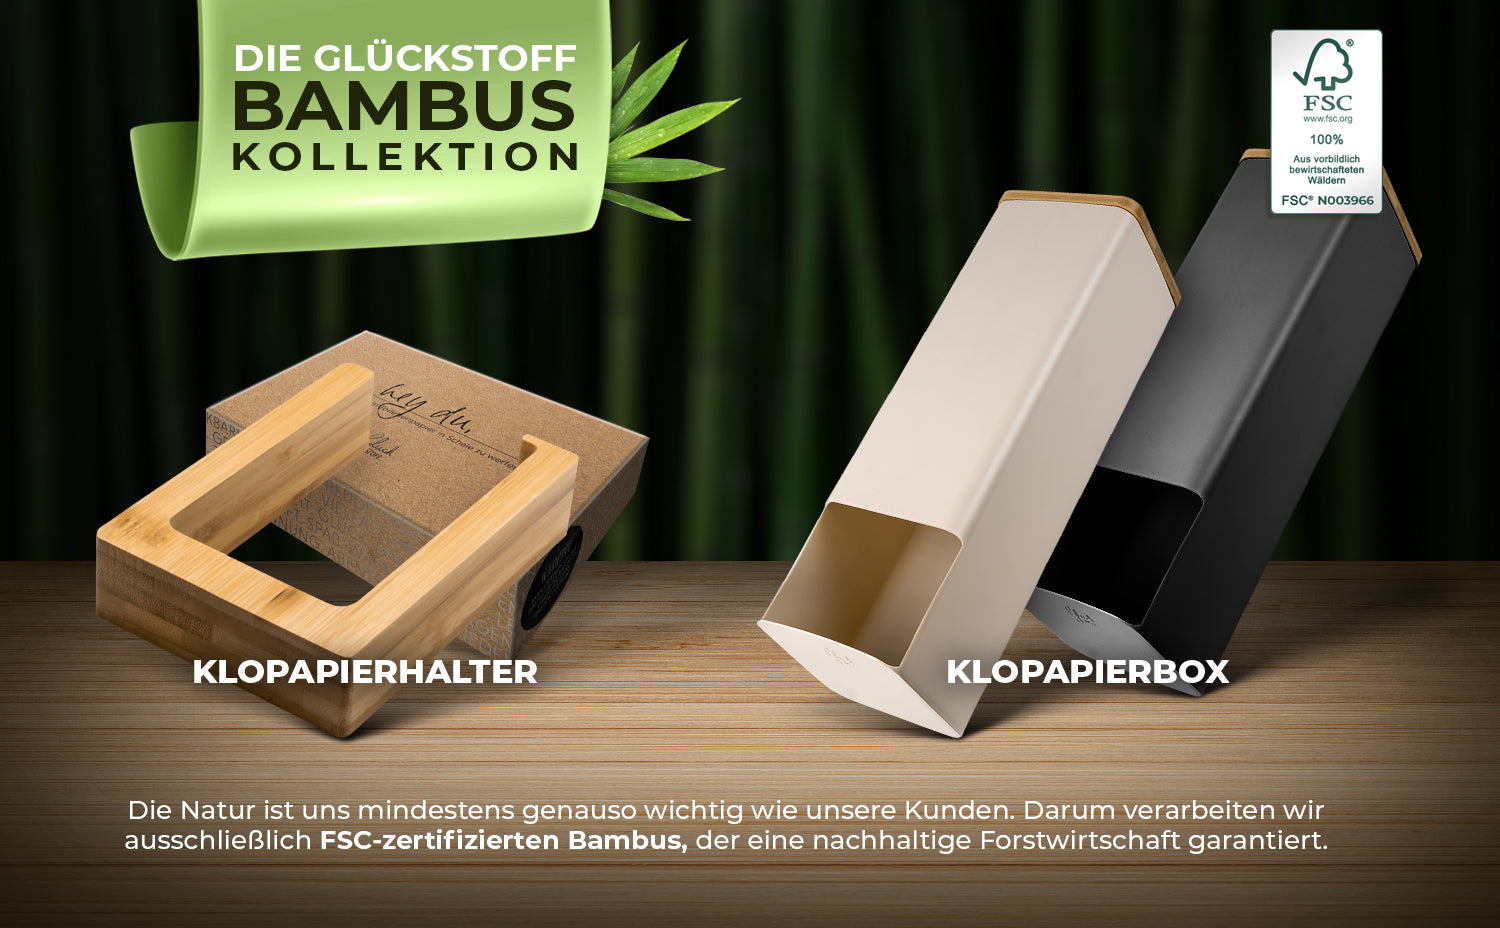 Toilet paper holder made of FSC-certified bamboo (no drilling)